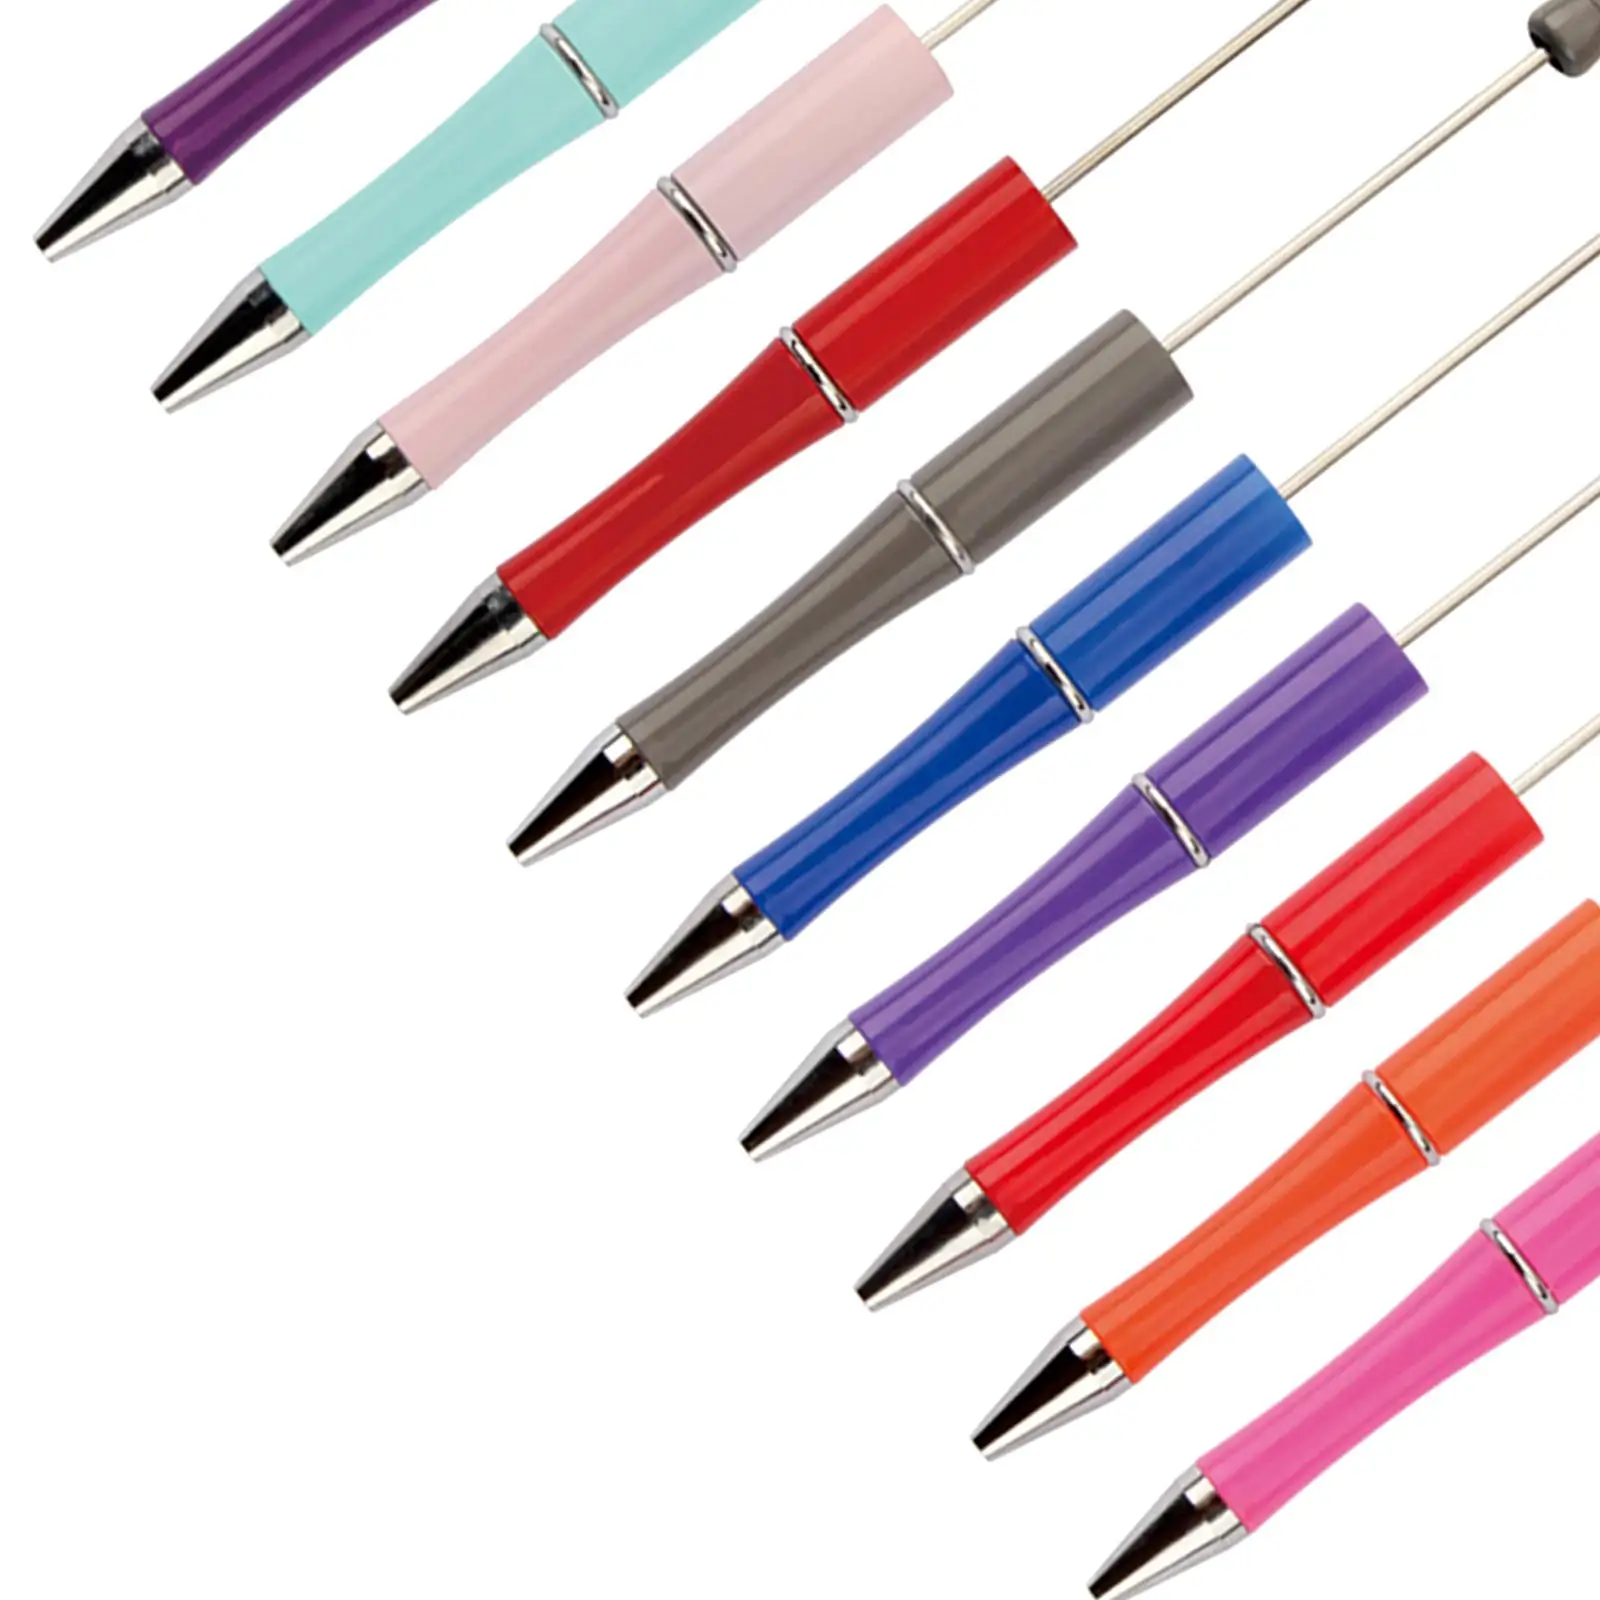 10Pcs Ballpoint Pens Black Ink Cool Beadable Pens DIY Making Gift Office Supplies for Graduation Students Drawing Kids Classroom